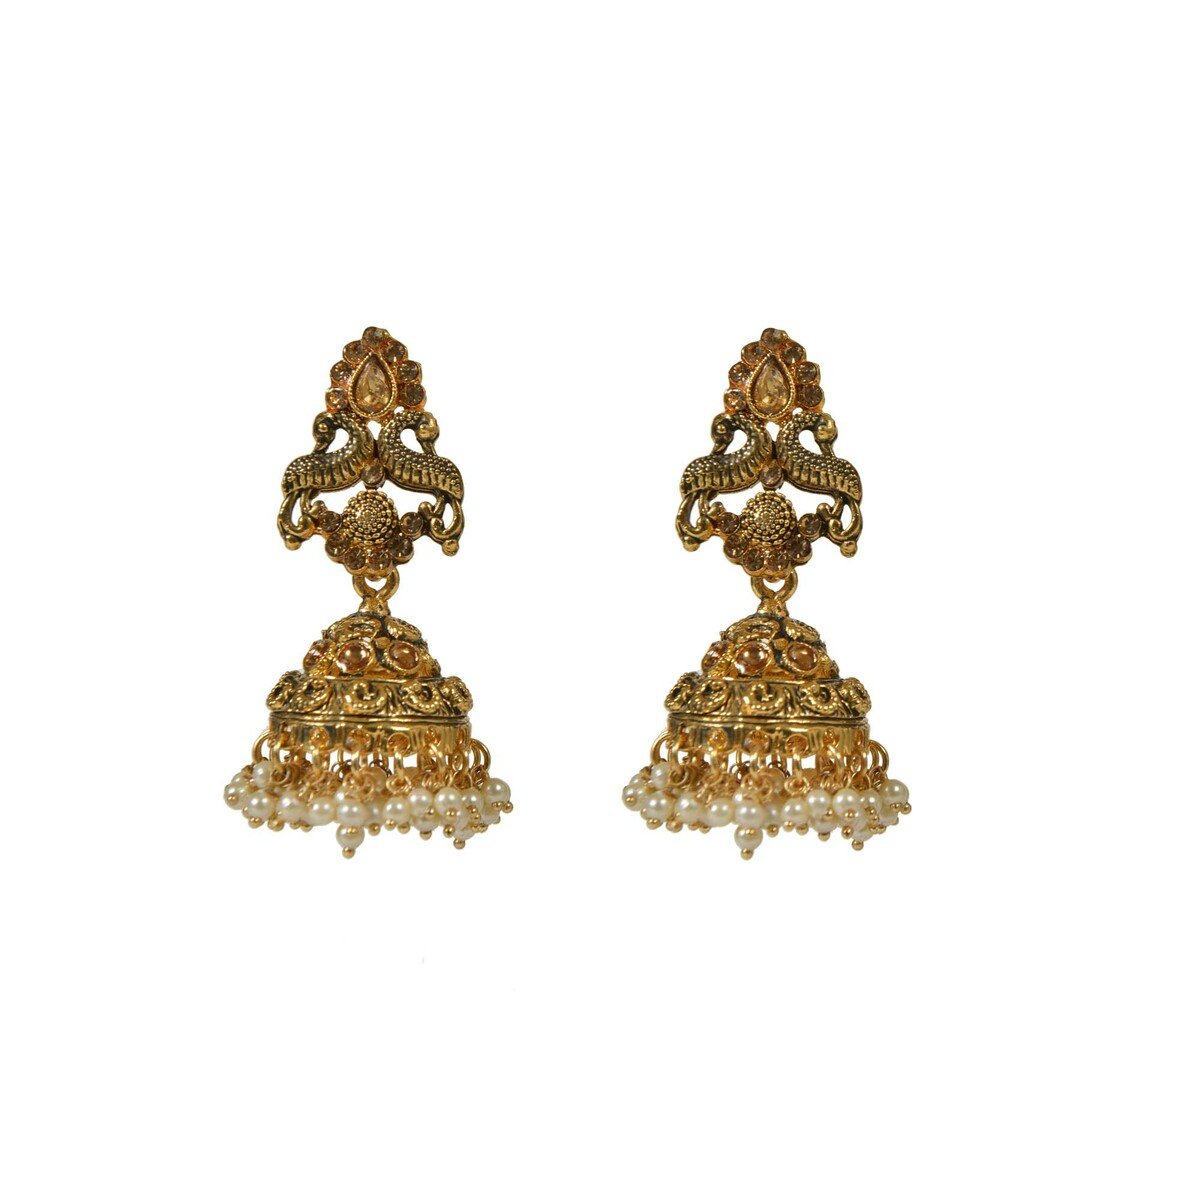 Eten Traditional Ethnic Earrings Antique Oxidized Gold Color WB041